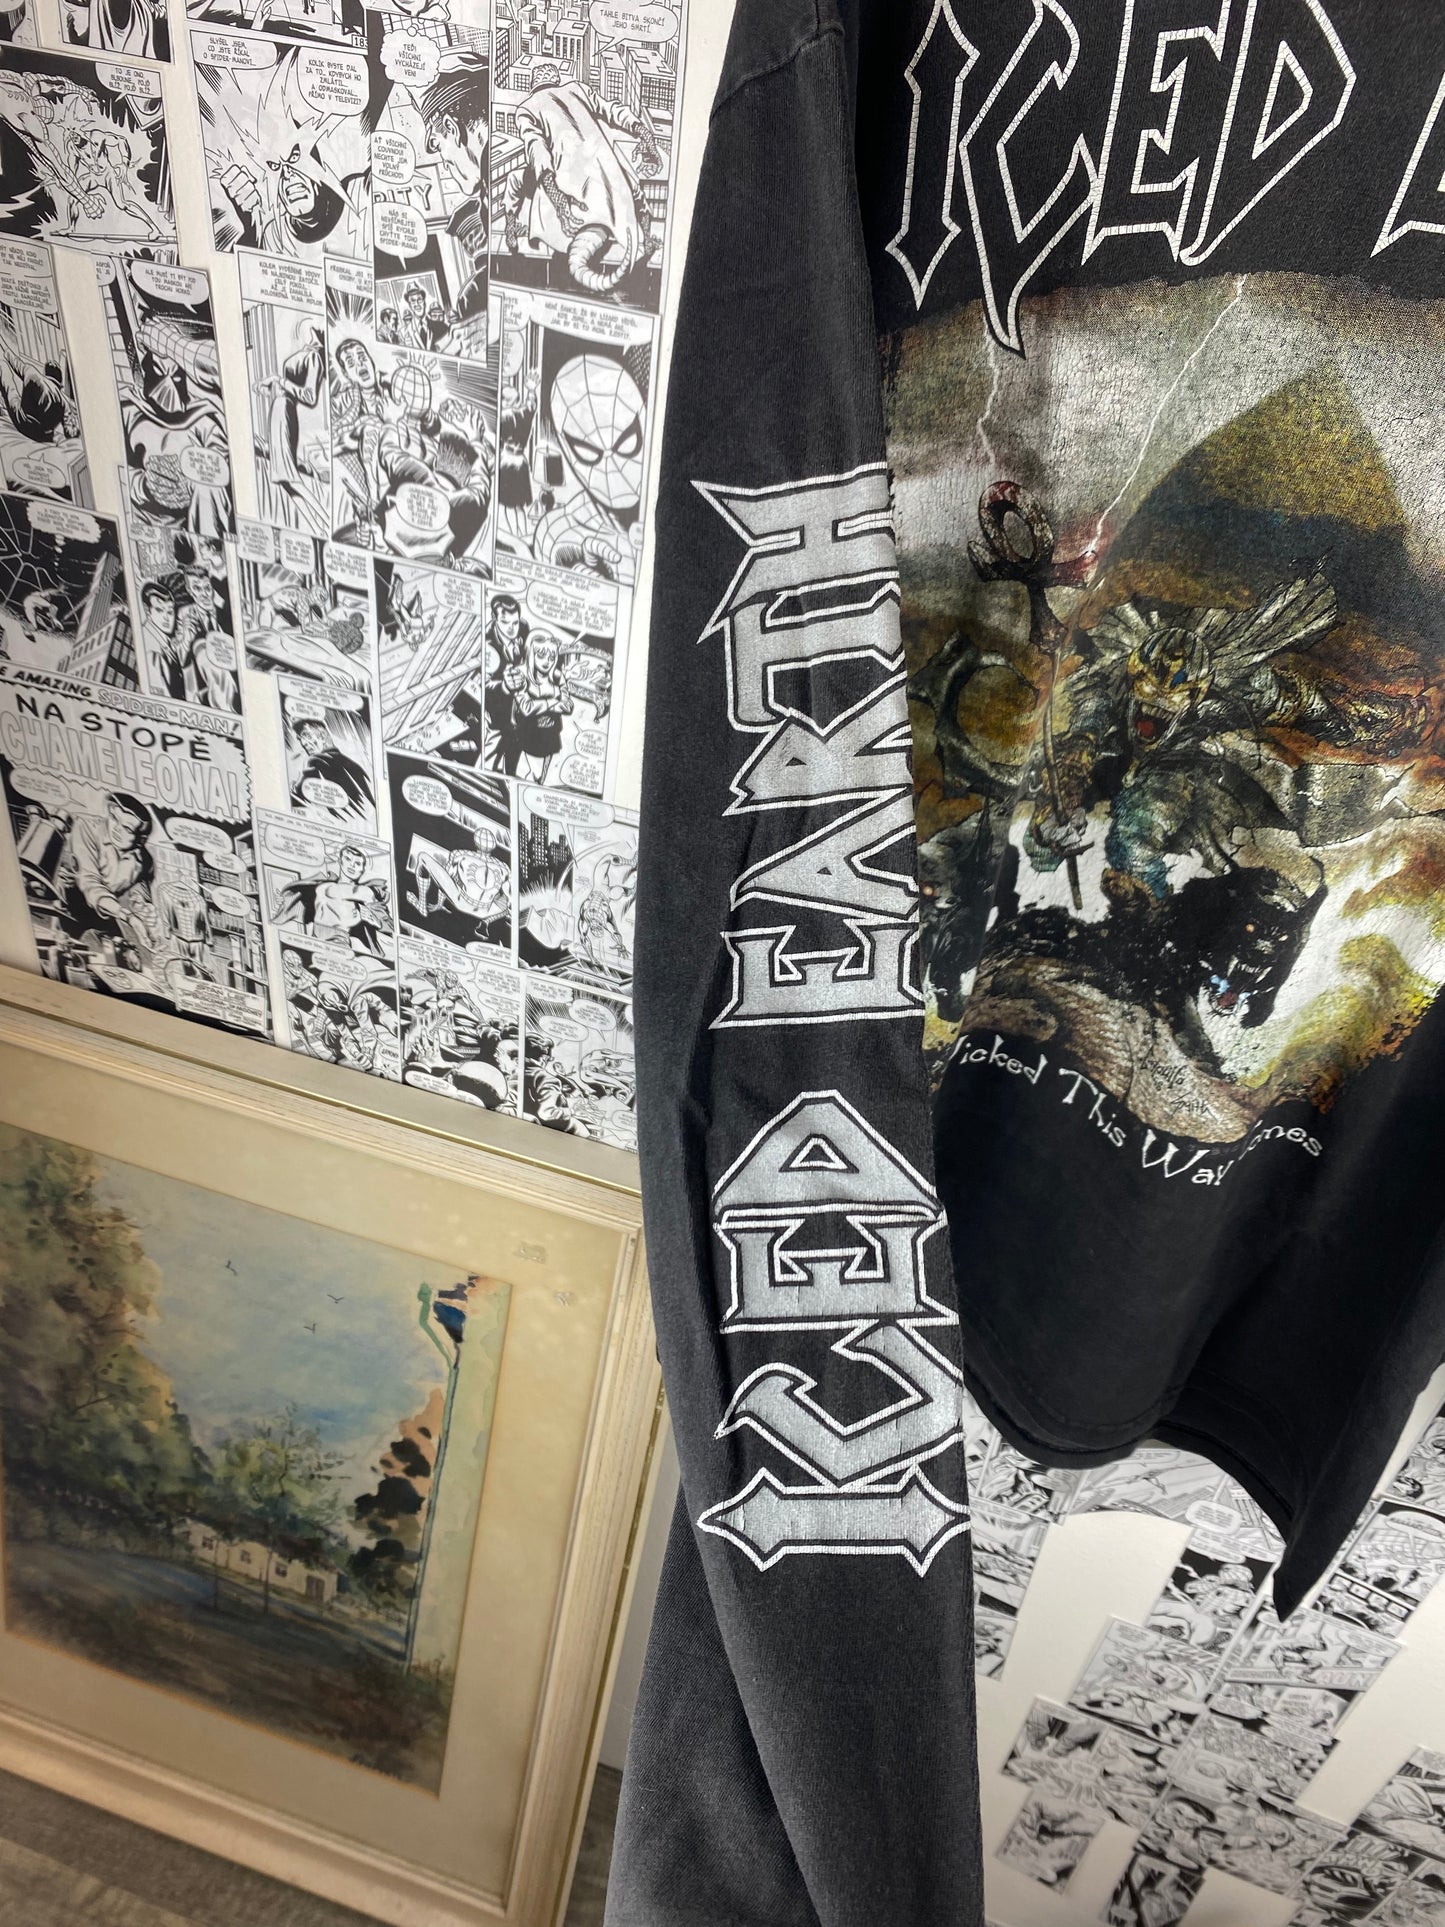 Vintage Iced Earth “Something Wicked” 90s Longsleeve t-shirt